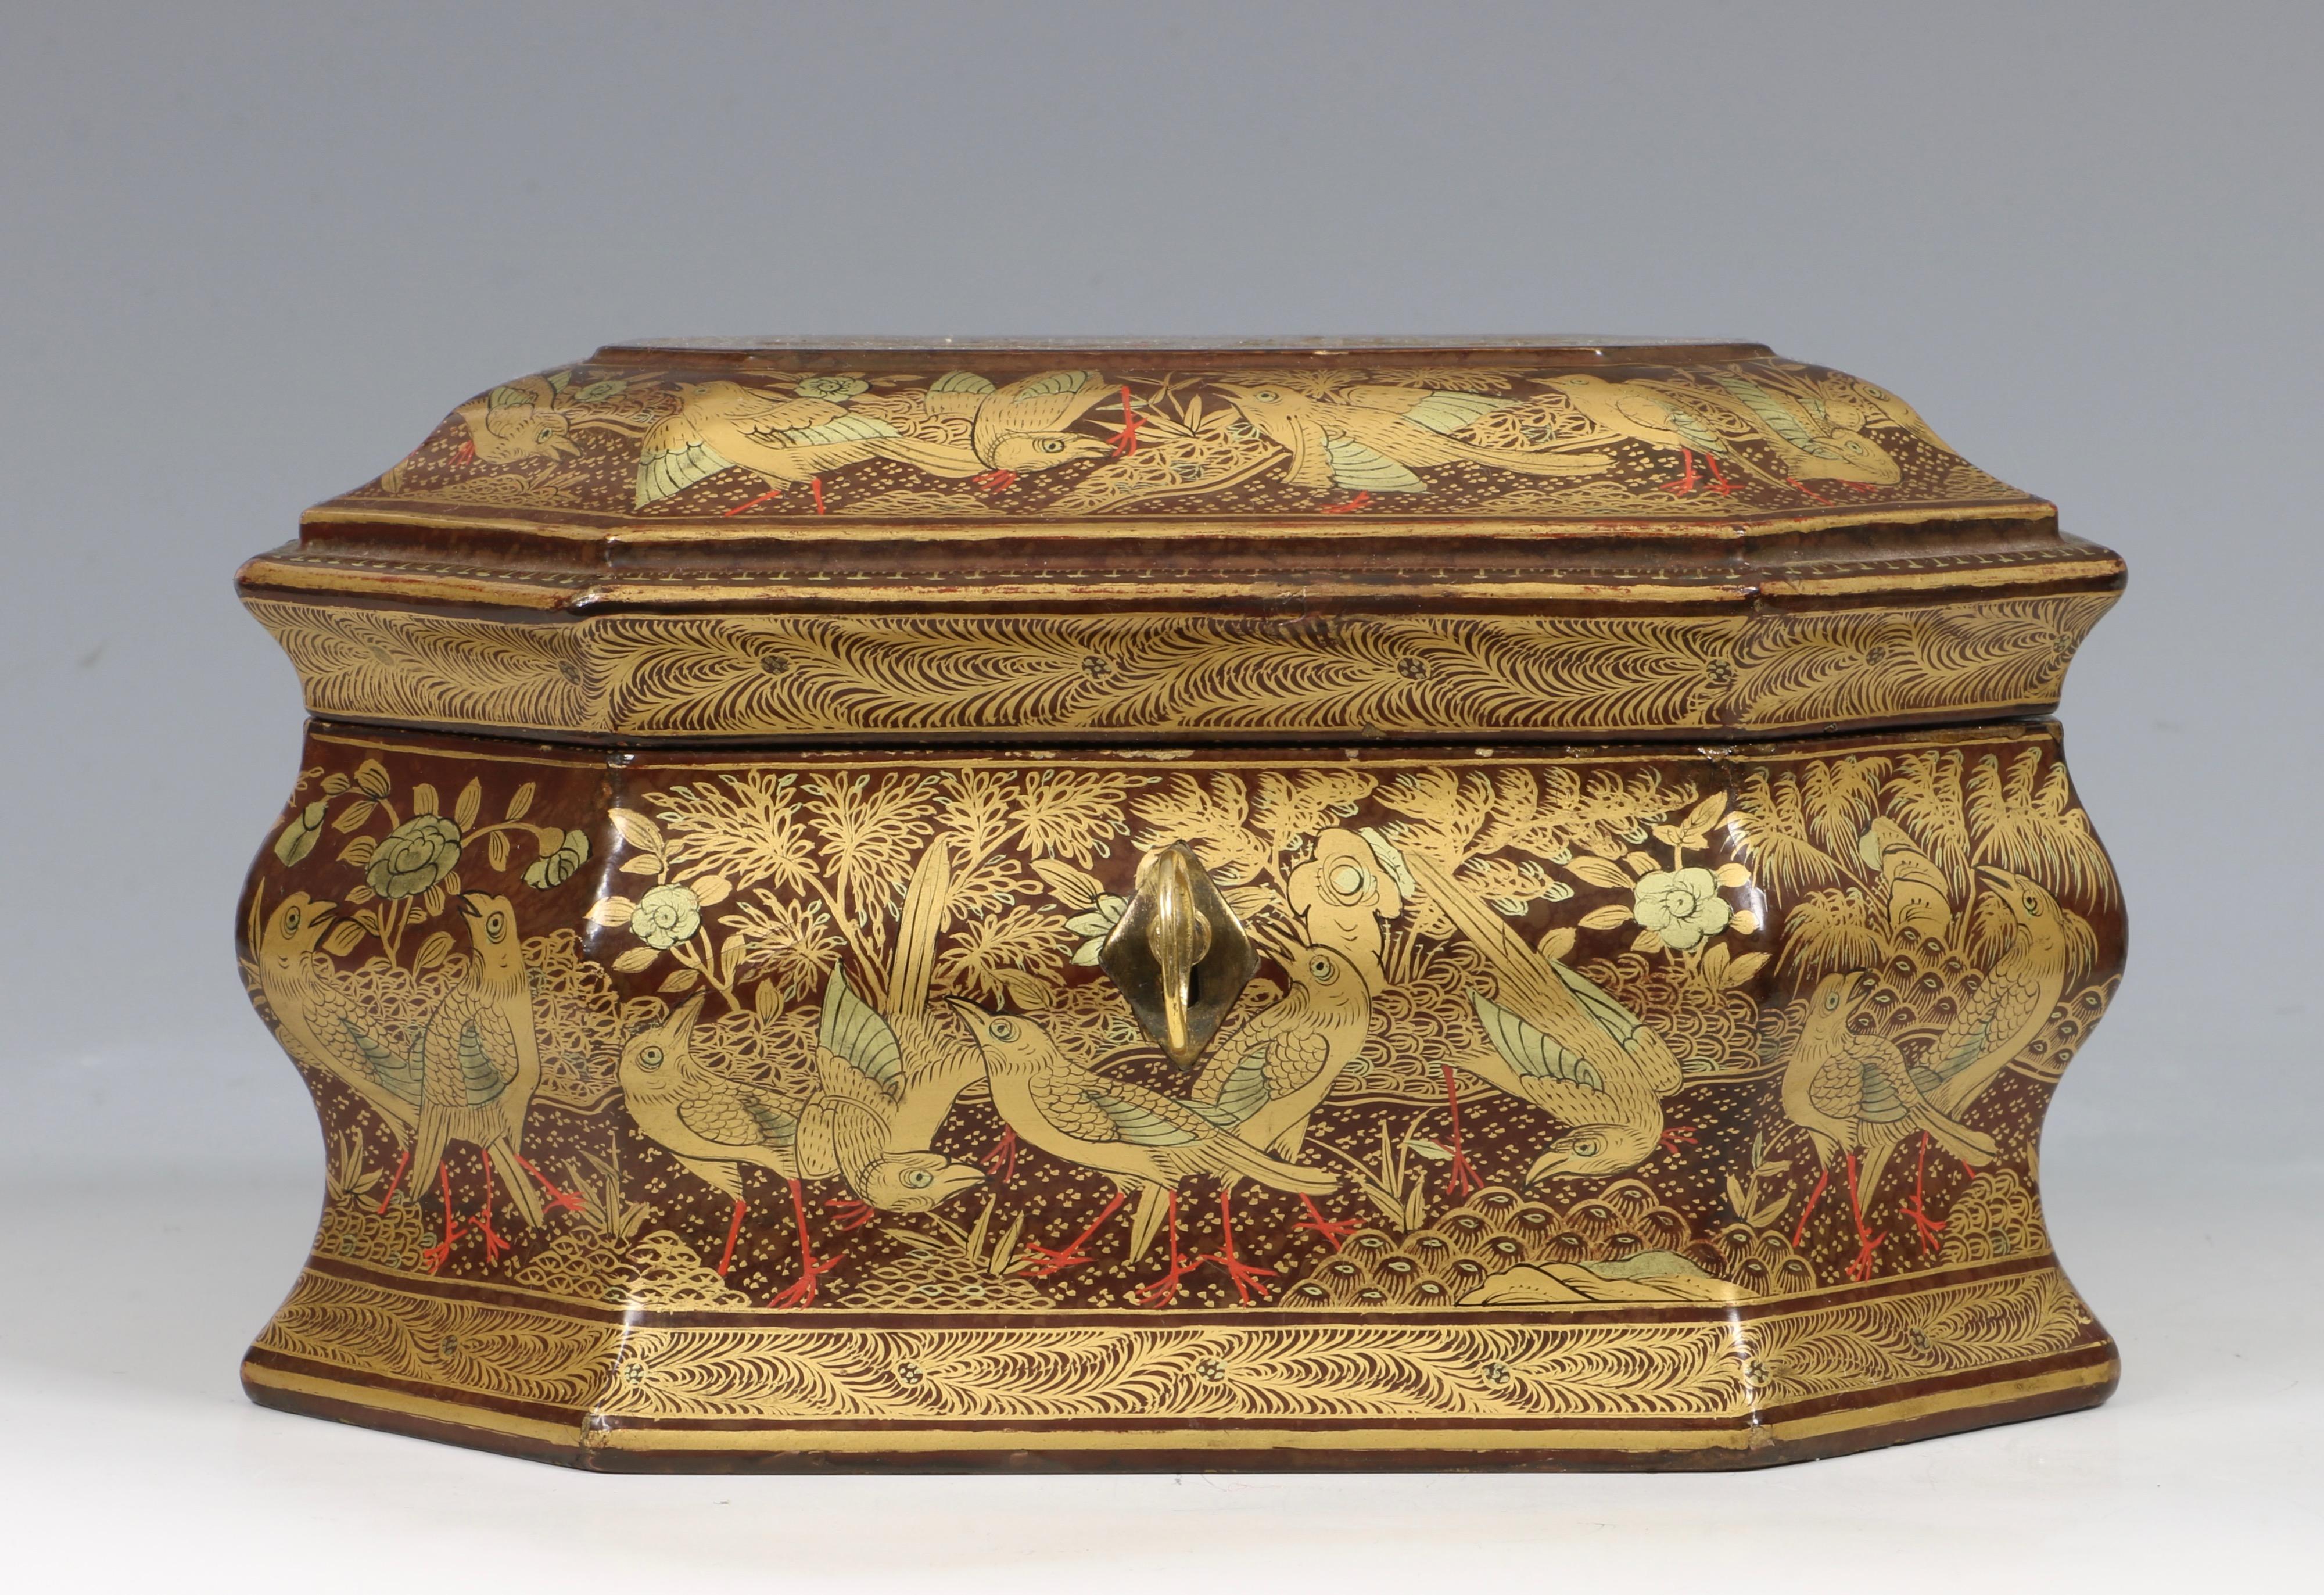 A Chinese export lacquer tea caddy

The octagonal box decorated with birds in landscapes, 

the cover with a pair of peacocks and other birds

Containing a pewter caddy, the cover incised with another bird

With key

Canton, mid-19th